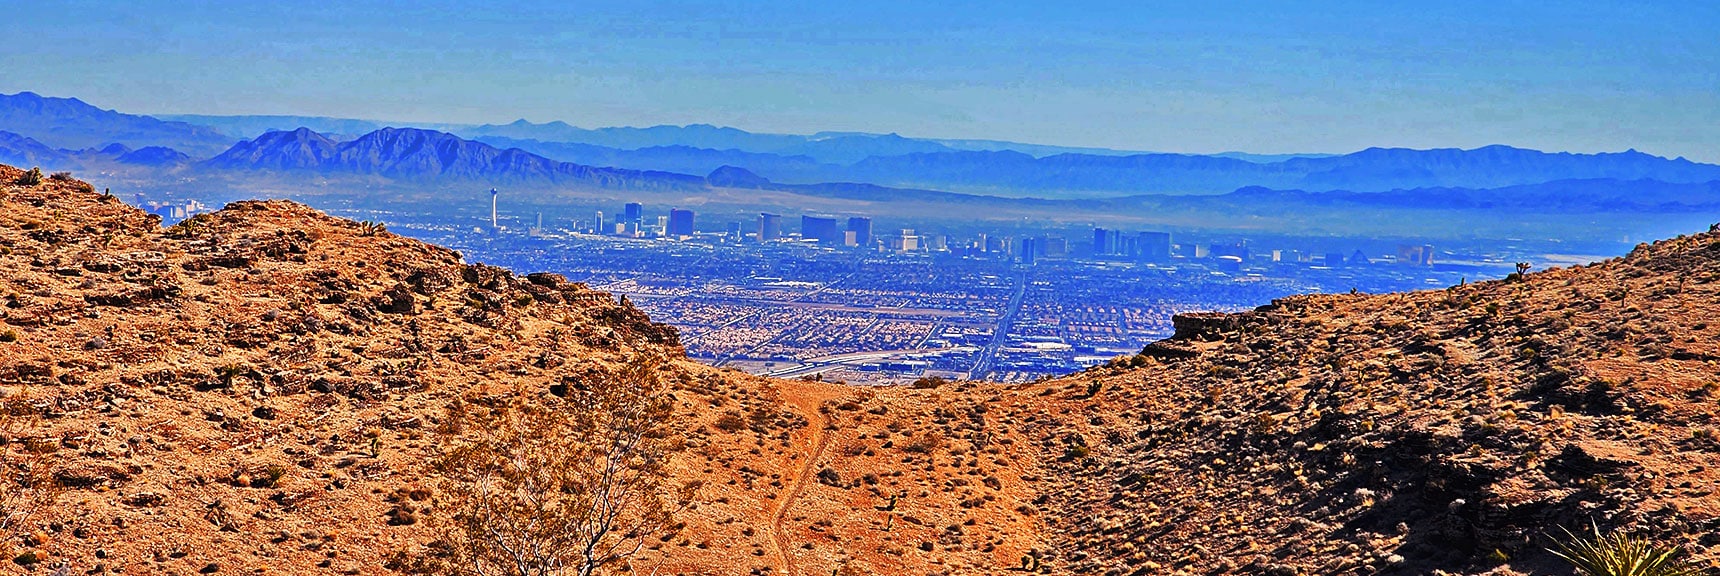 Vegas Strip Through Opening. Overlook Ridge Trail Heads South (Right) | Eastern Outer Circuit | Blue Diamond Hill | Red Rock Canyon, Nevada